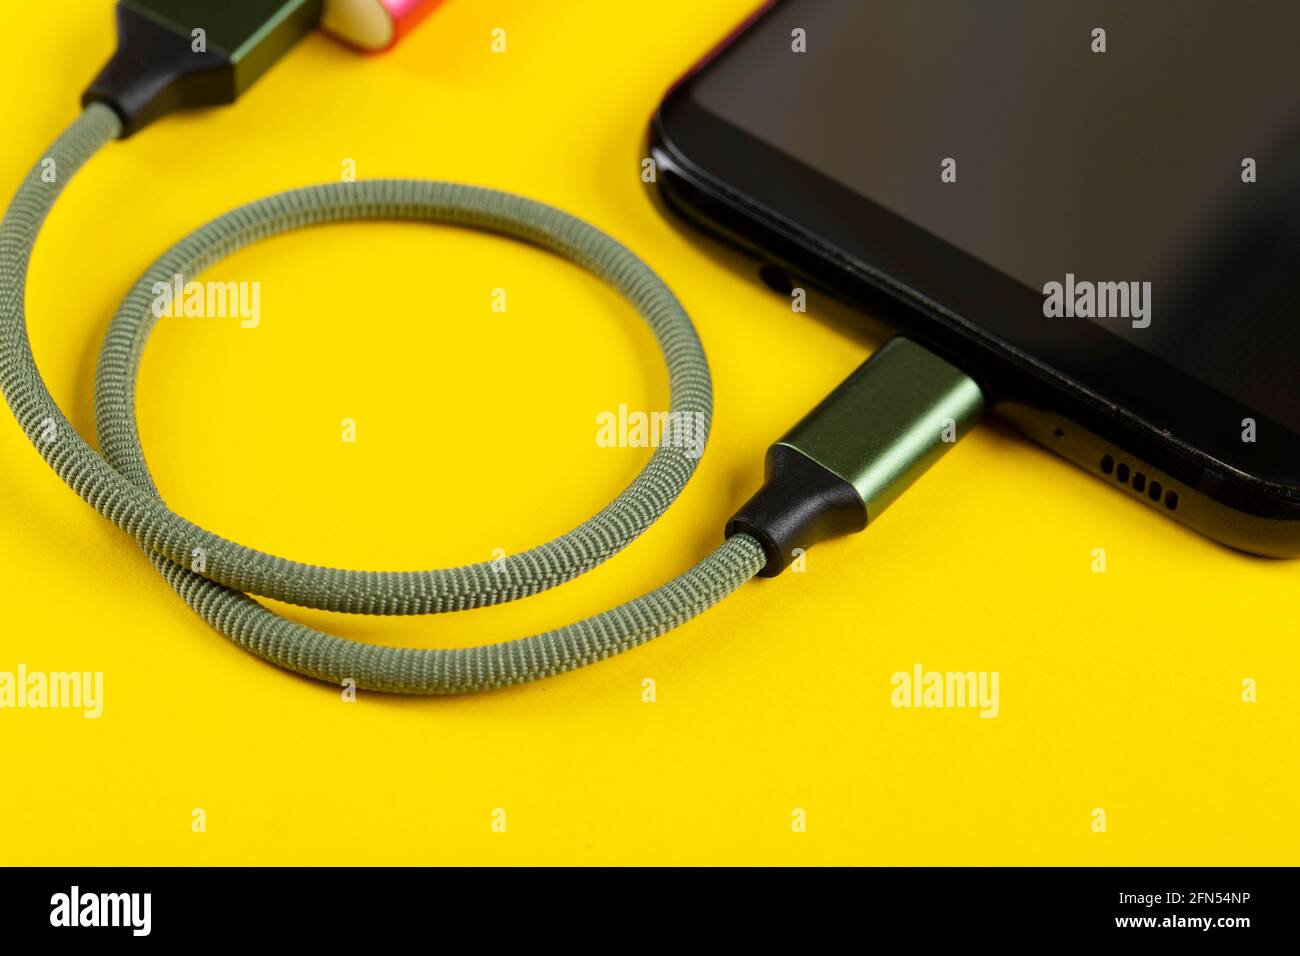 Charging a mobile phone on a yellow background. Stock Photo